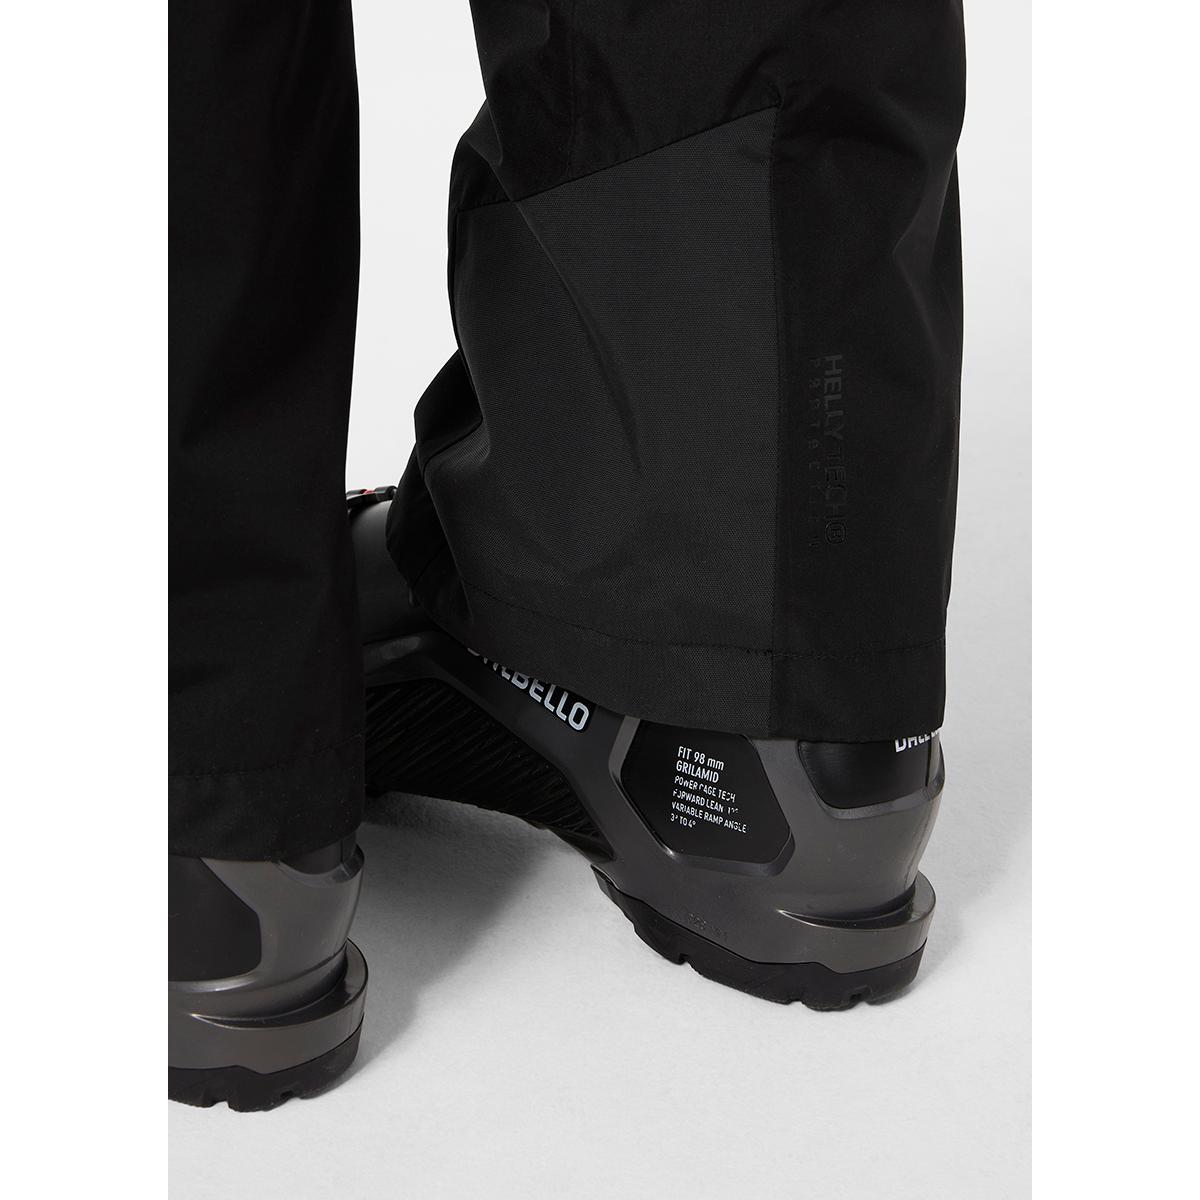 HELLY HANSEN BLIZZARD INSULATED PANTS